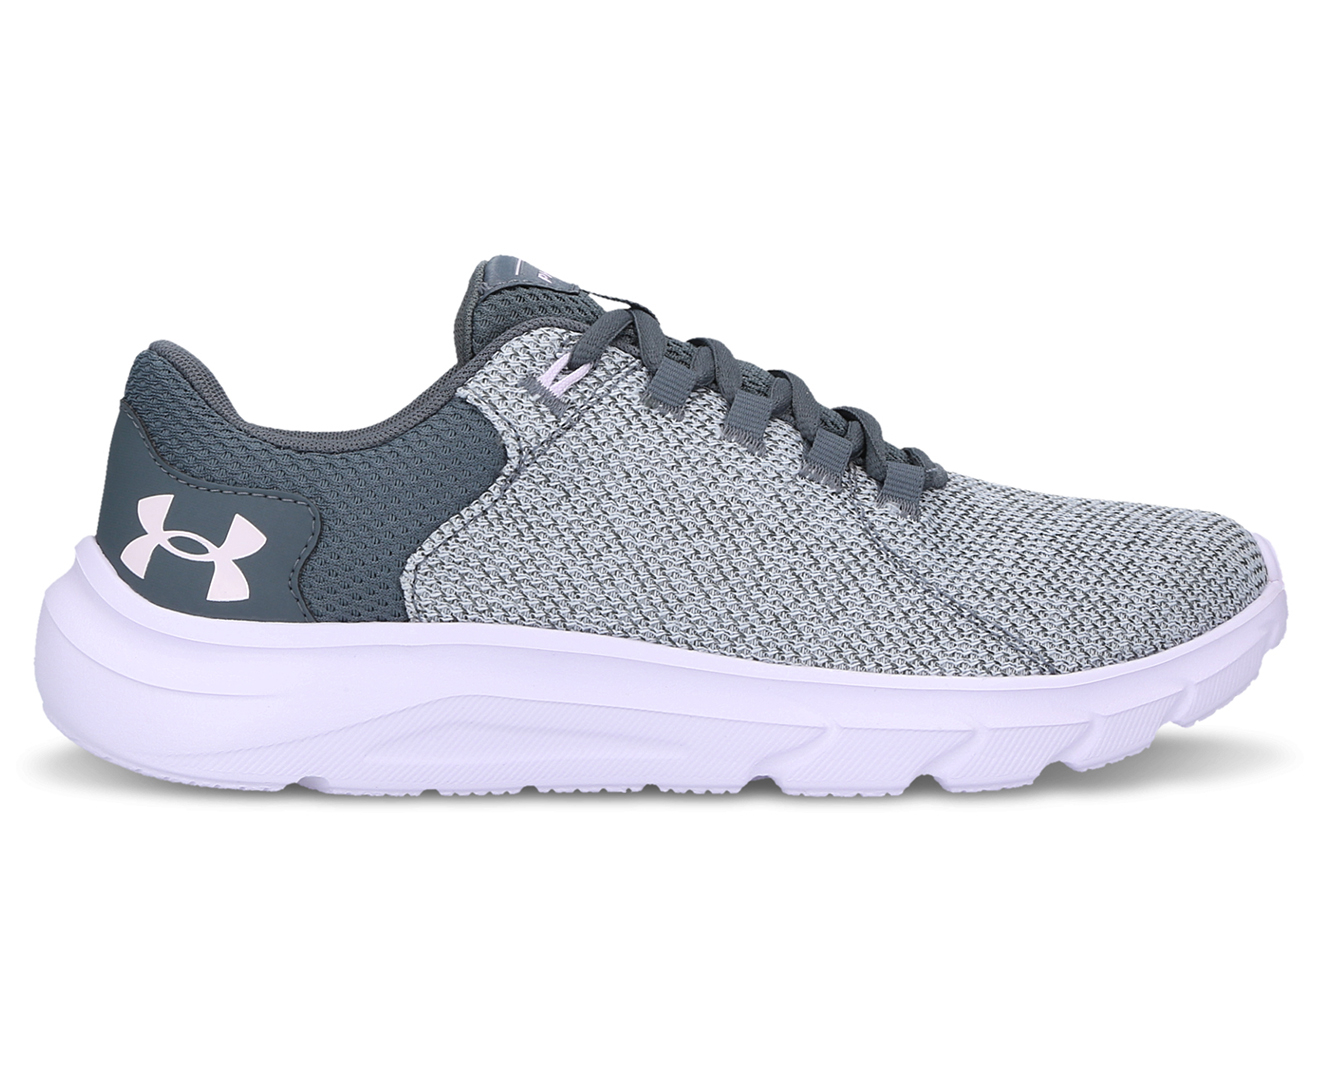 Under Armour Women's Phade RN Trainers - Grey/Pink | Catch.co.nz